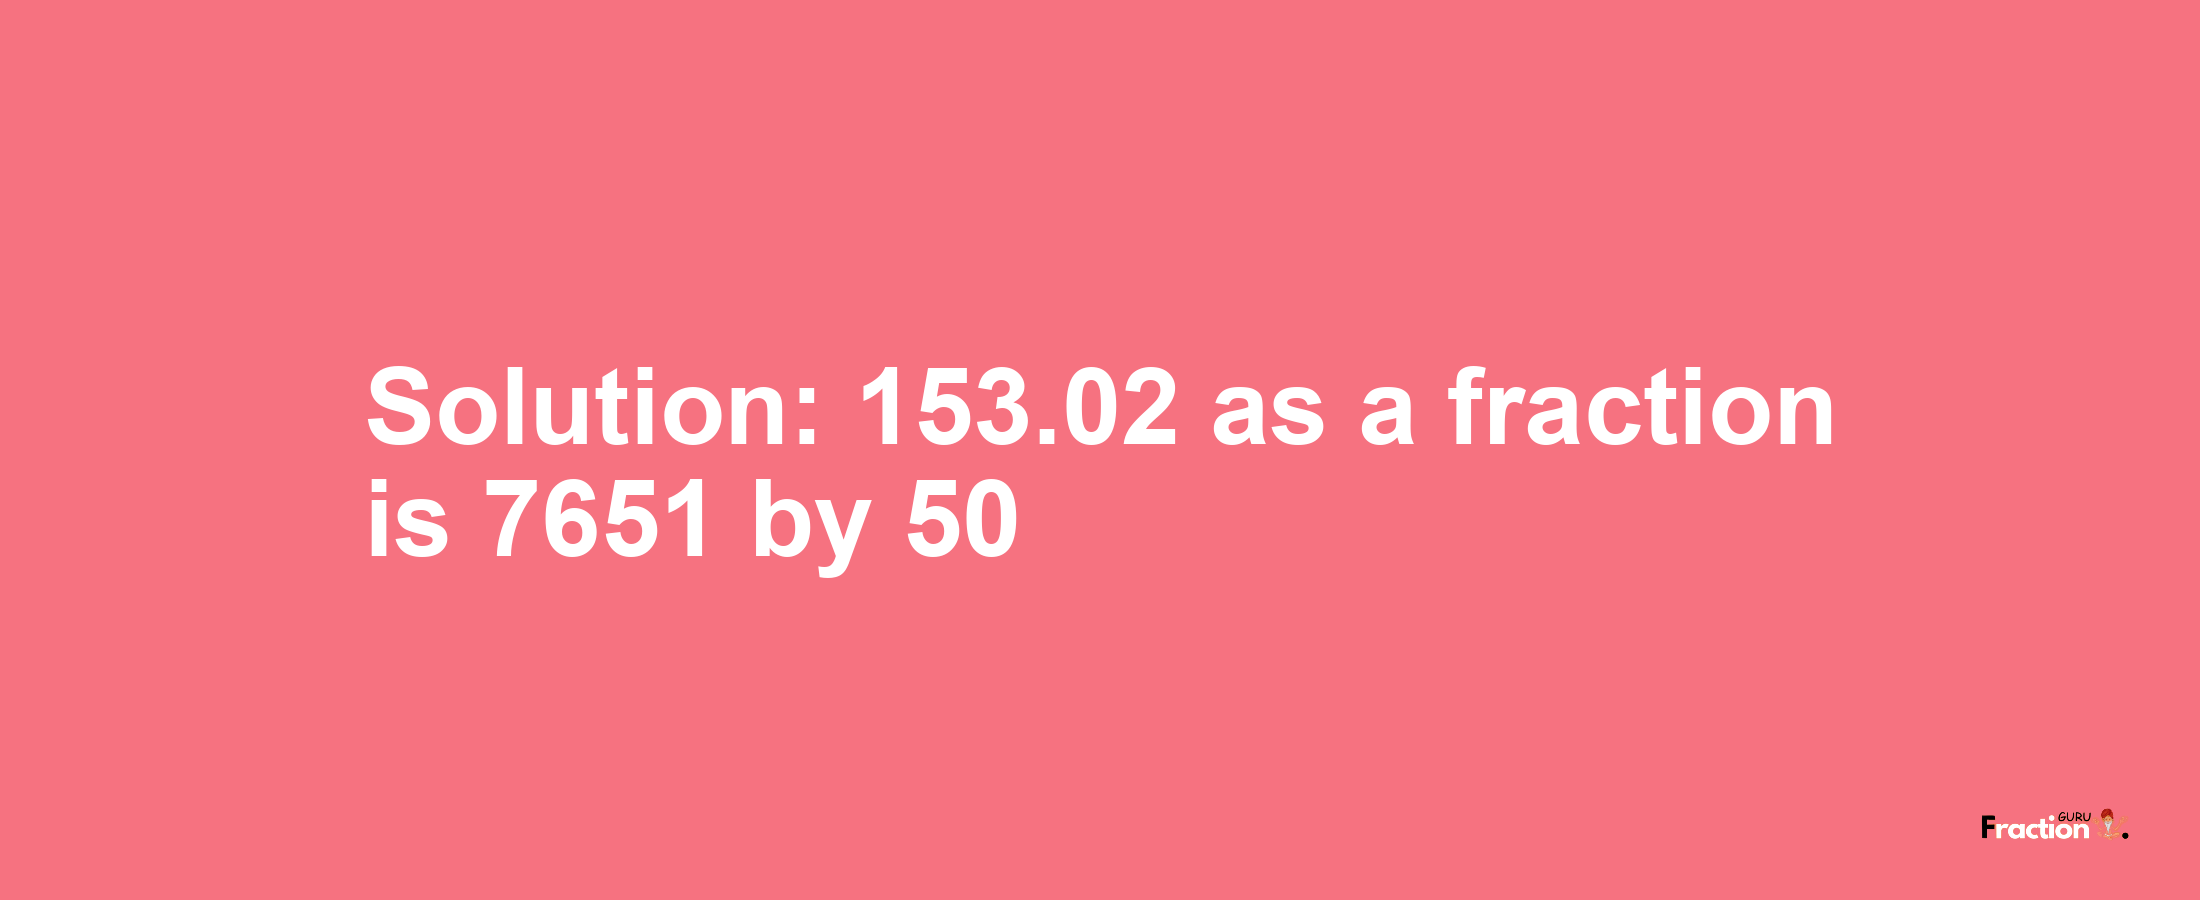 Solution:153.02 as a fraction is 7651/50